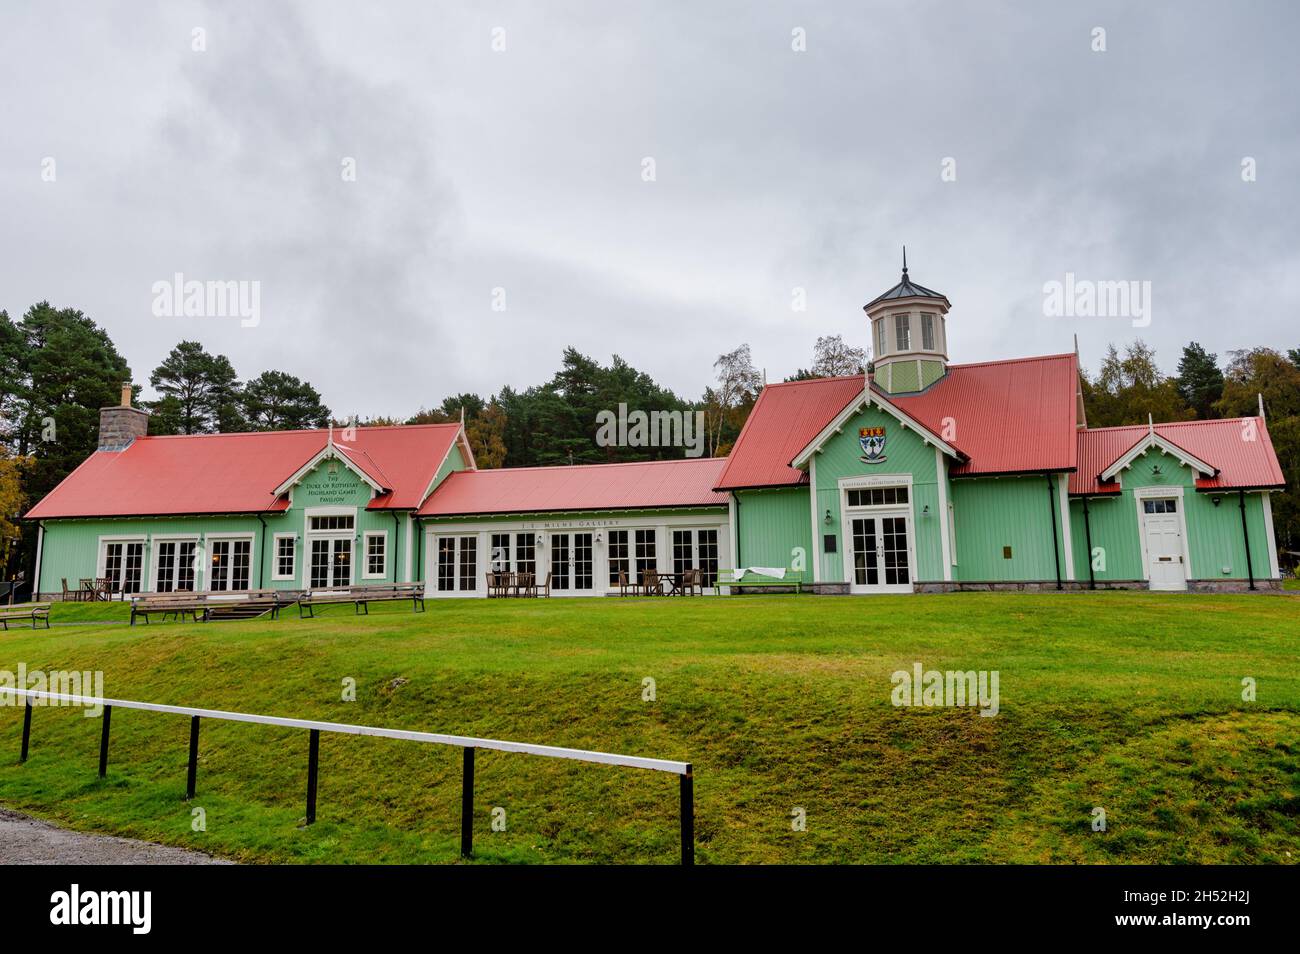 Braemar, Scotland- Oct 17, 2021: The Duke of Rothesay Highland Games Pavilion in the Cairngorms of Scotland Stock Photo